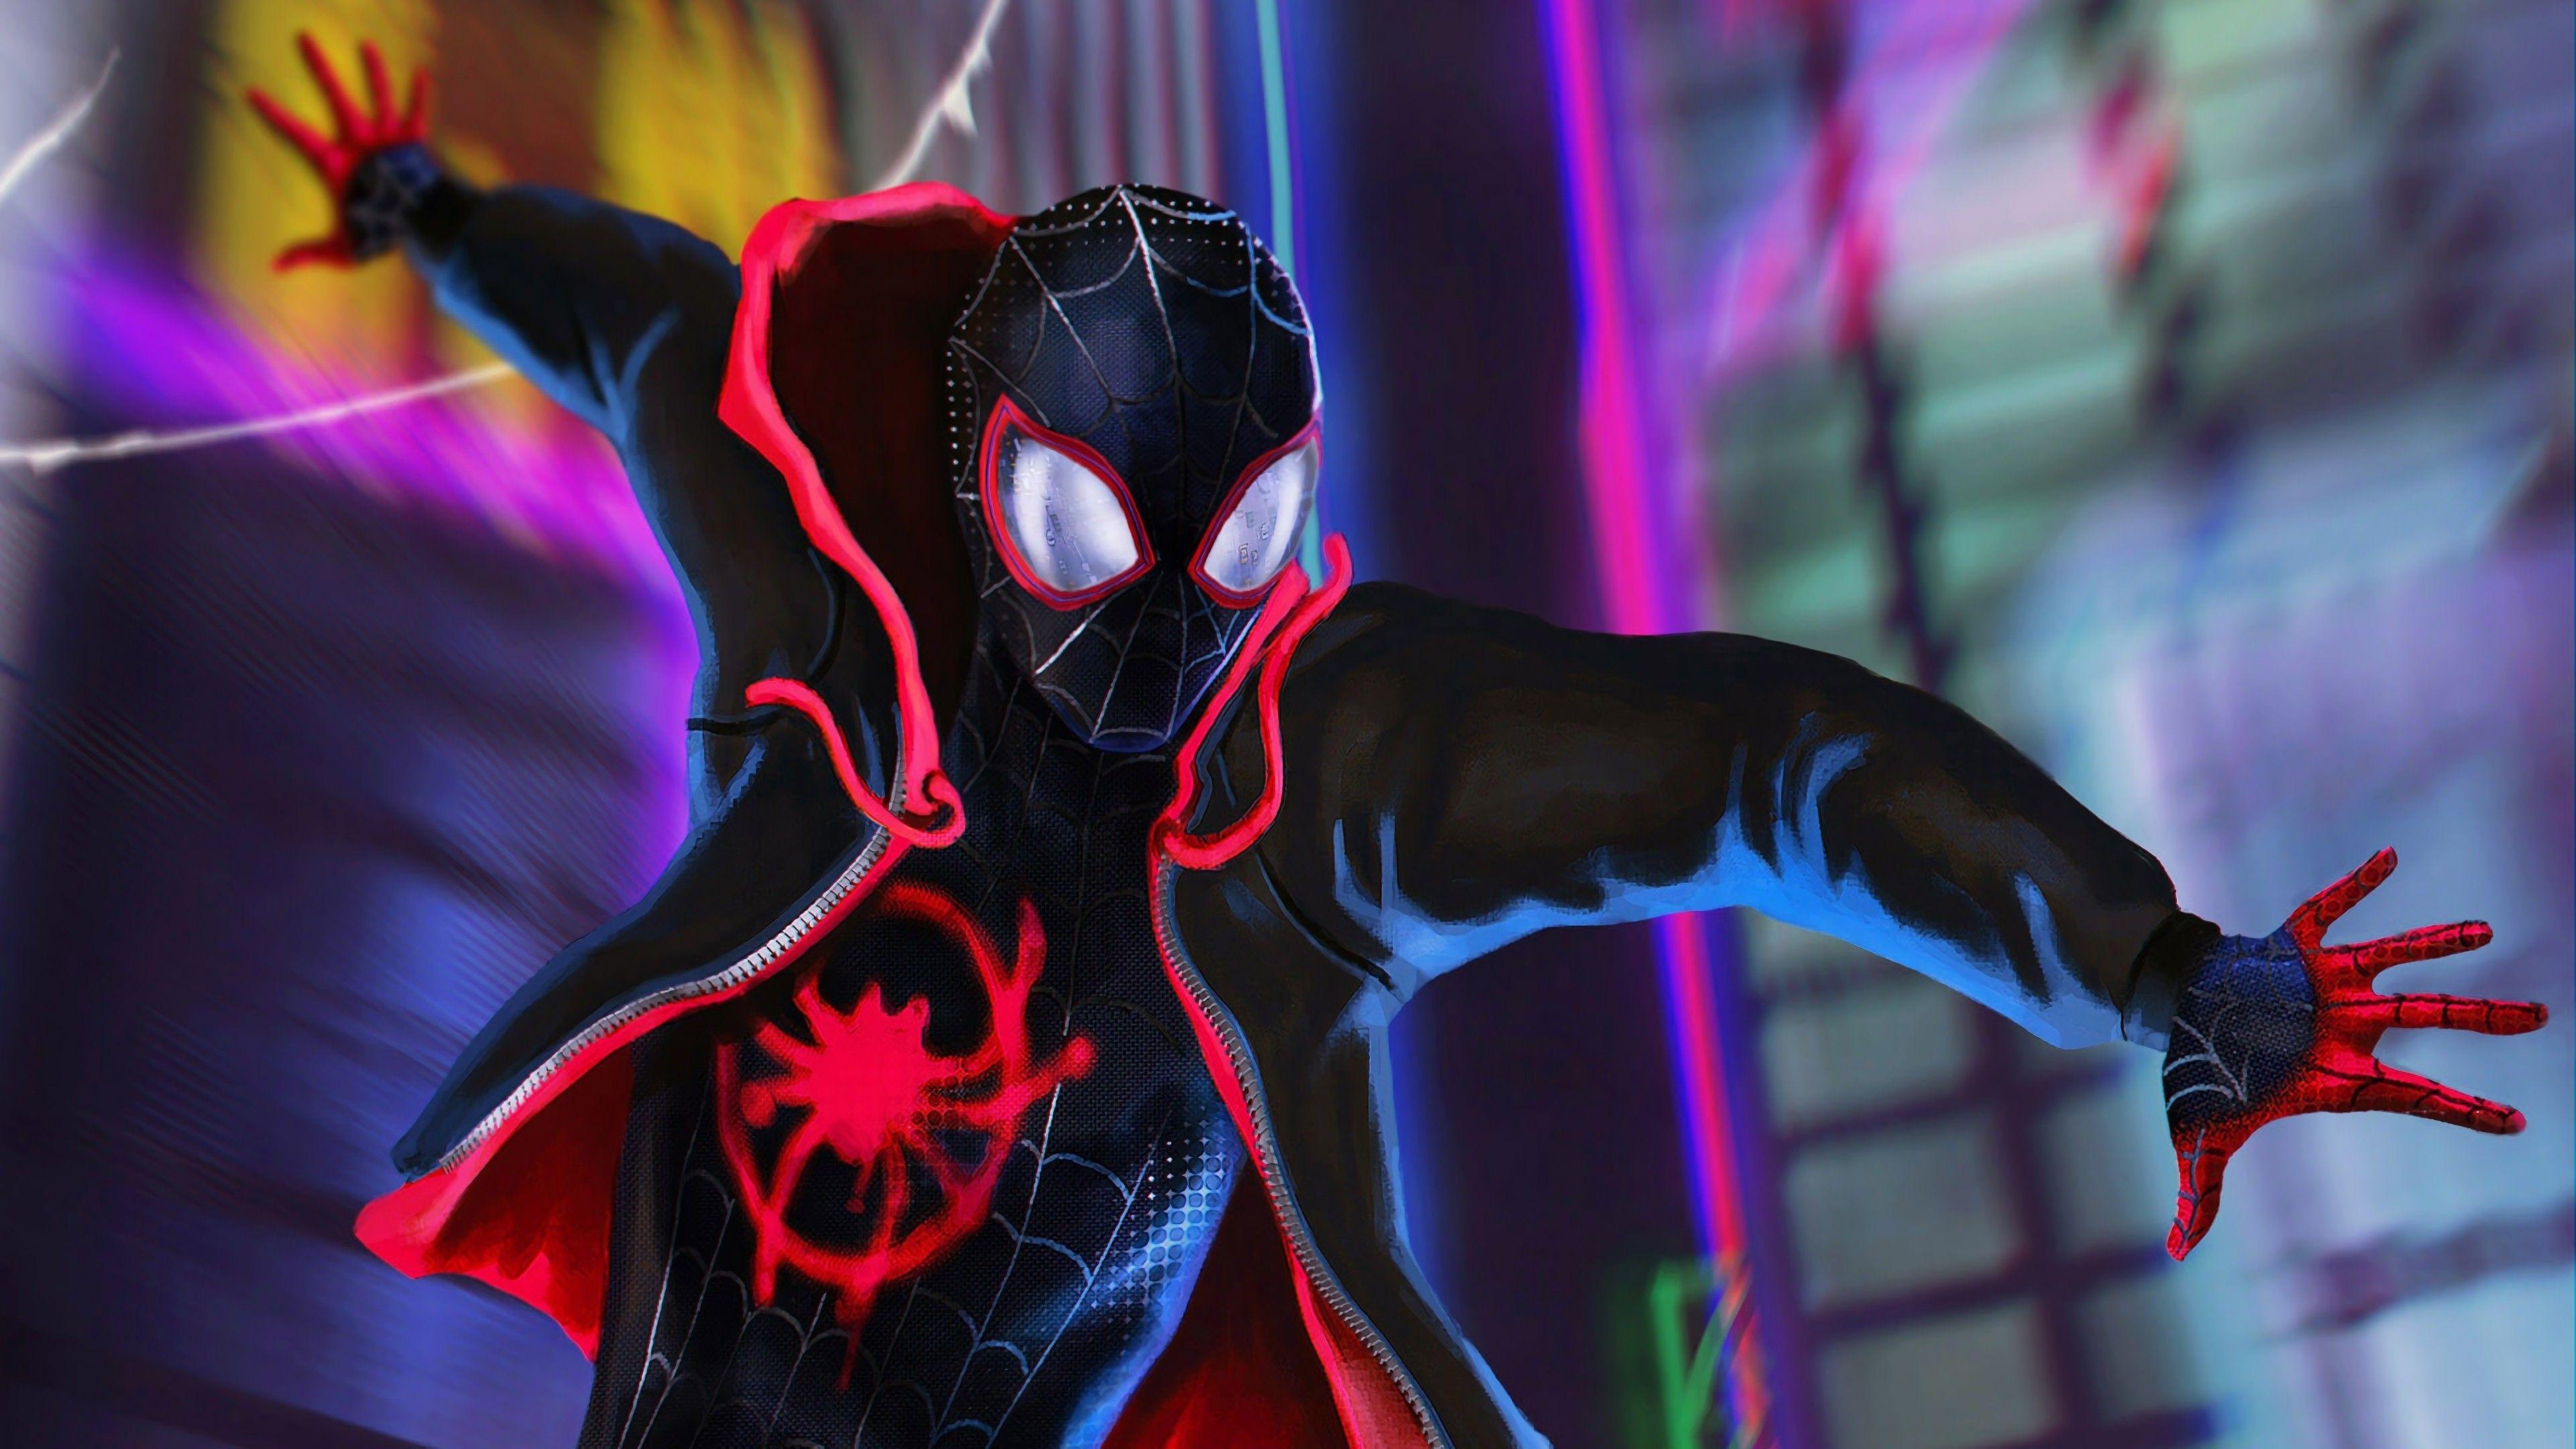 Ultra Hd Spider Man Into The Spider Verse Wallpaper K All Of The Spiderman Wallpapers Bellow